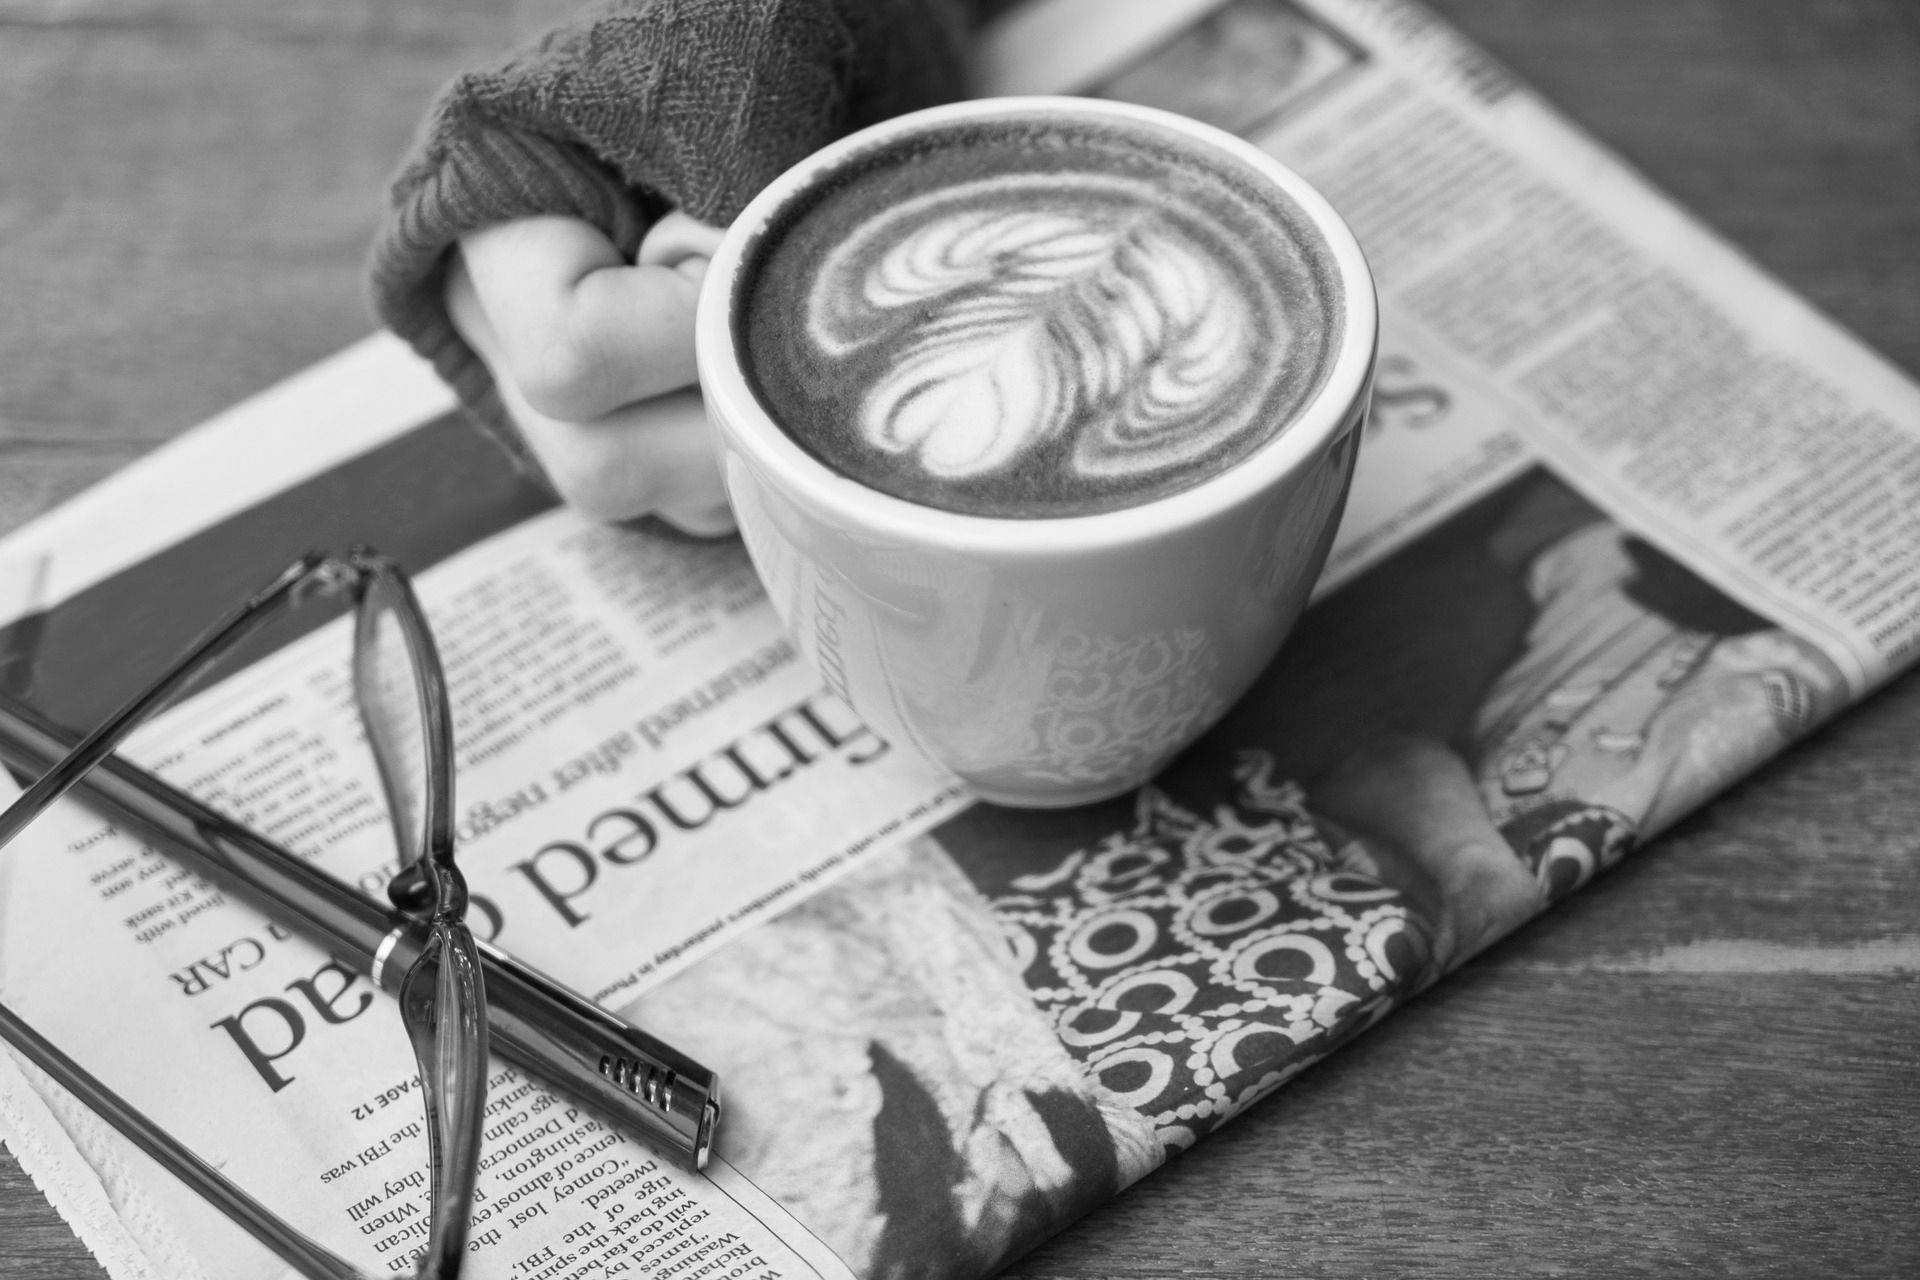 A hand holds a latte resting on a newspaper on a table.